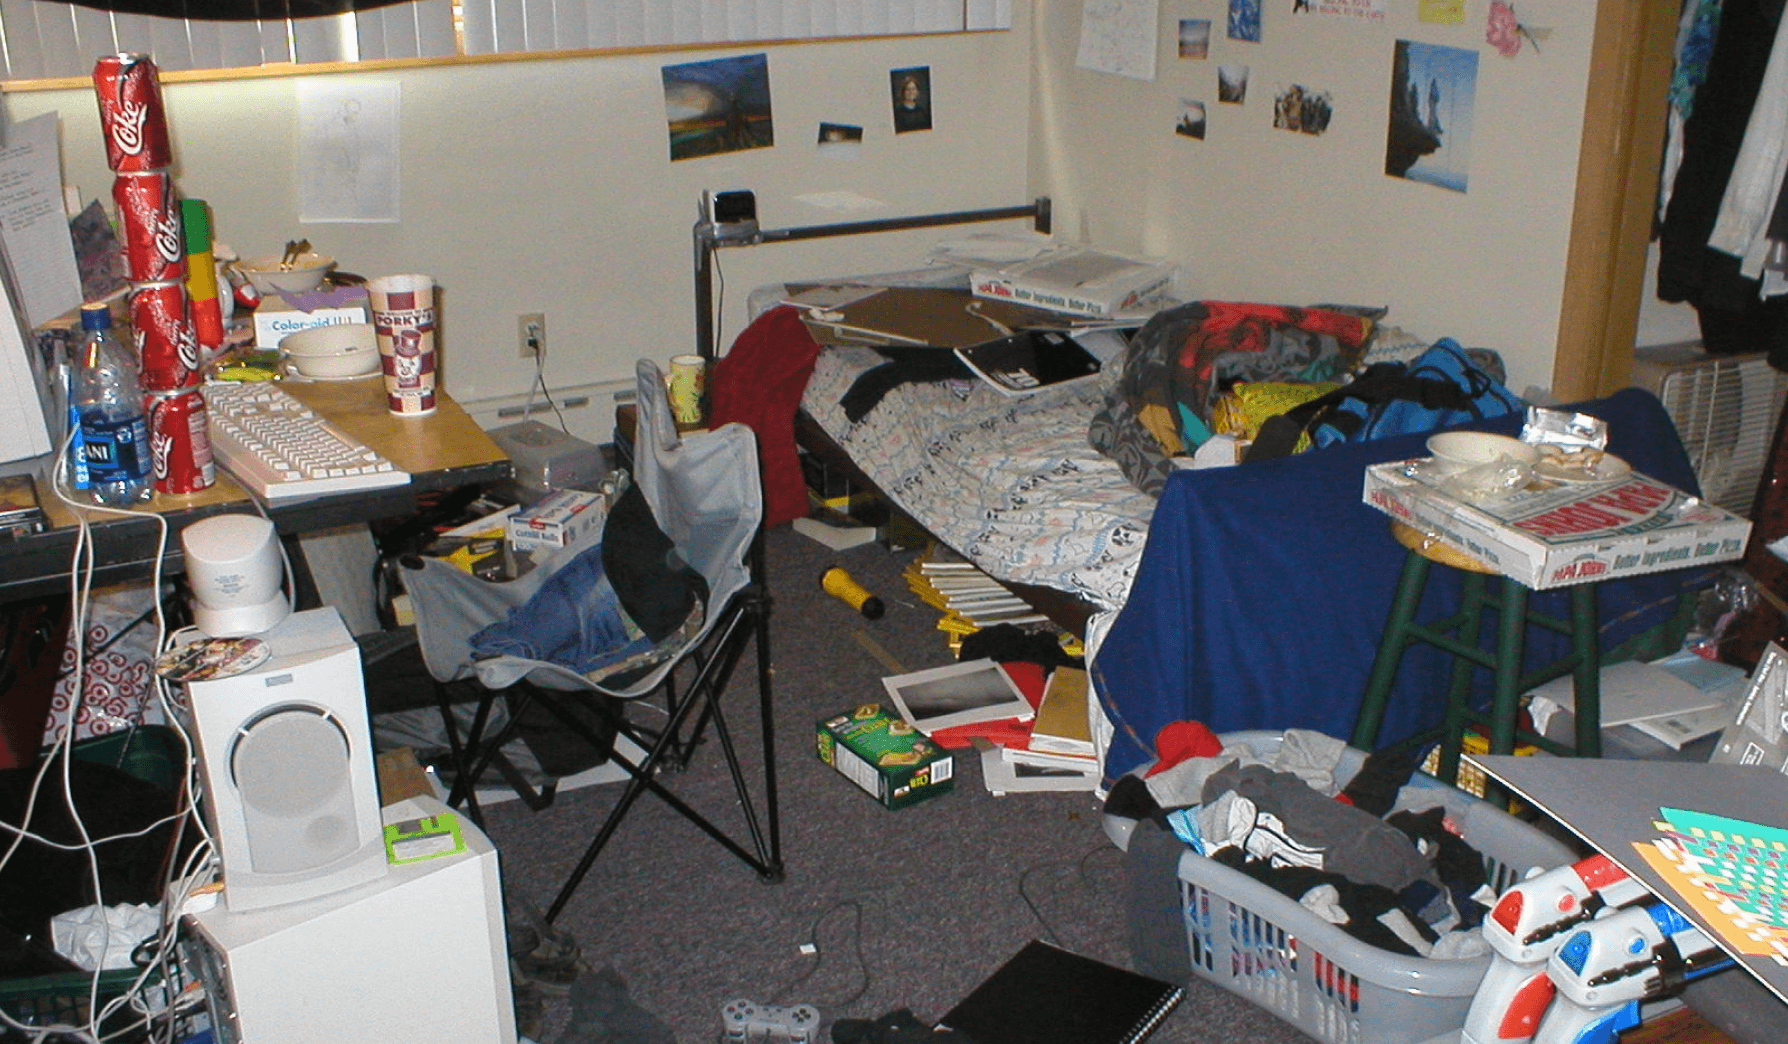 A typical messy room of a college student.